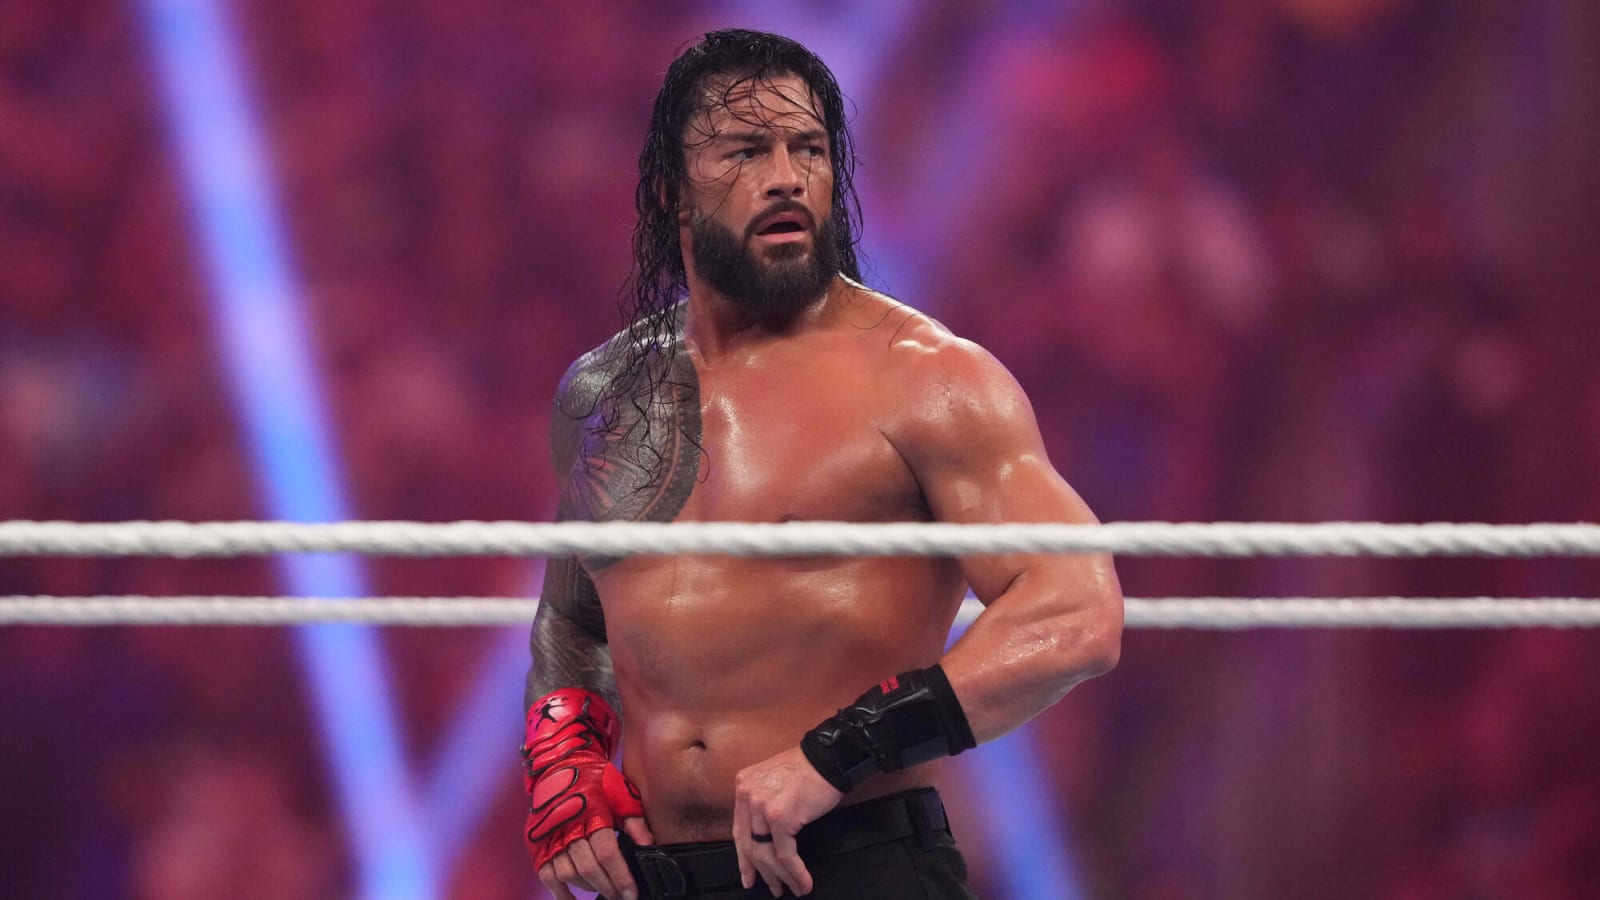 WWE Hall of Famer heaps praise on Roman Reigns’ run as Undisputed WWE Champion, claims that he carried the company